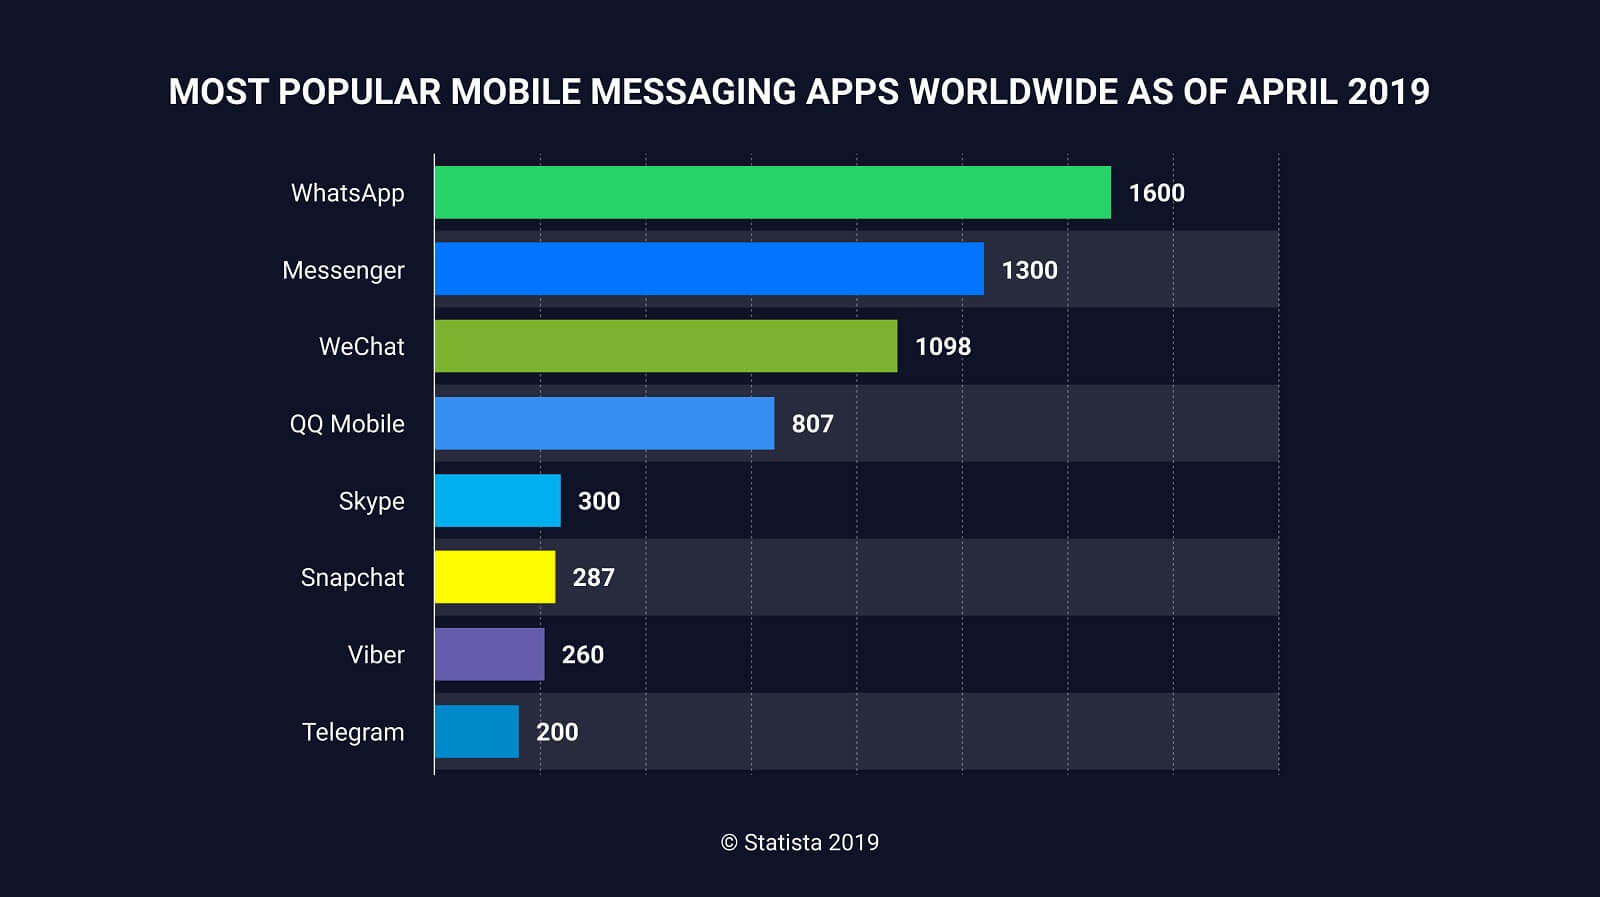 Most popular mobile messaging apps worldwide as of April 2019